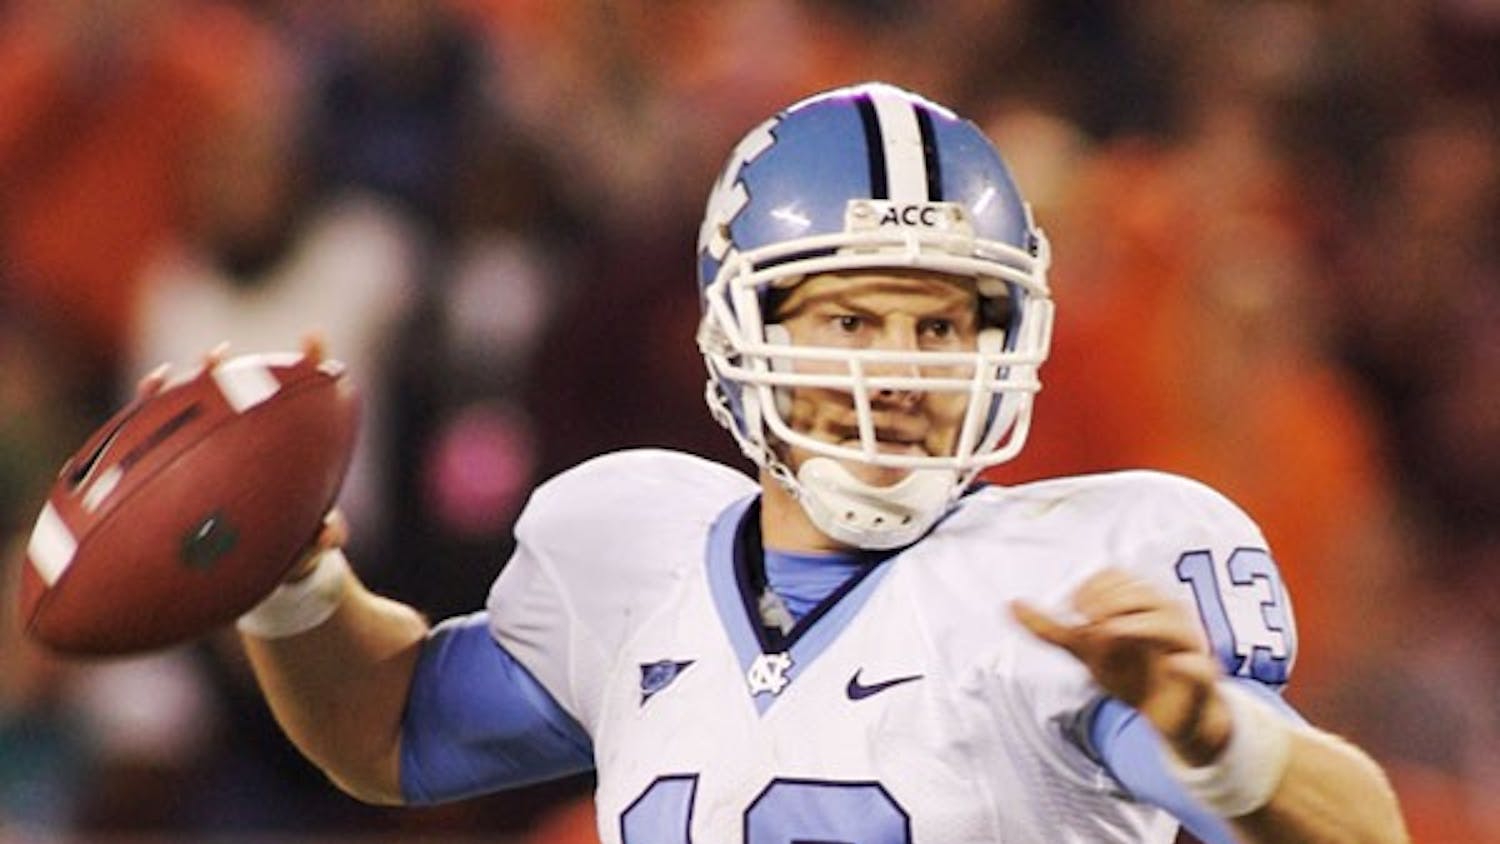 Quarterback T.J. Yates has experienced plenty of highs and lows this season for UNC. DTH File/Andrew Dye